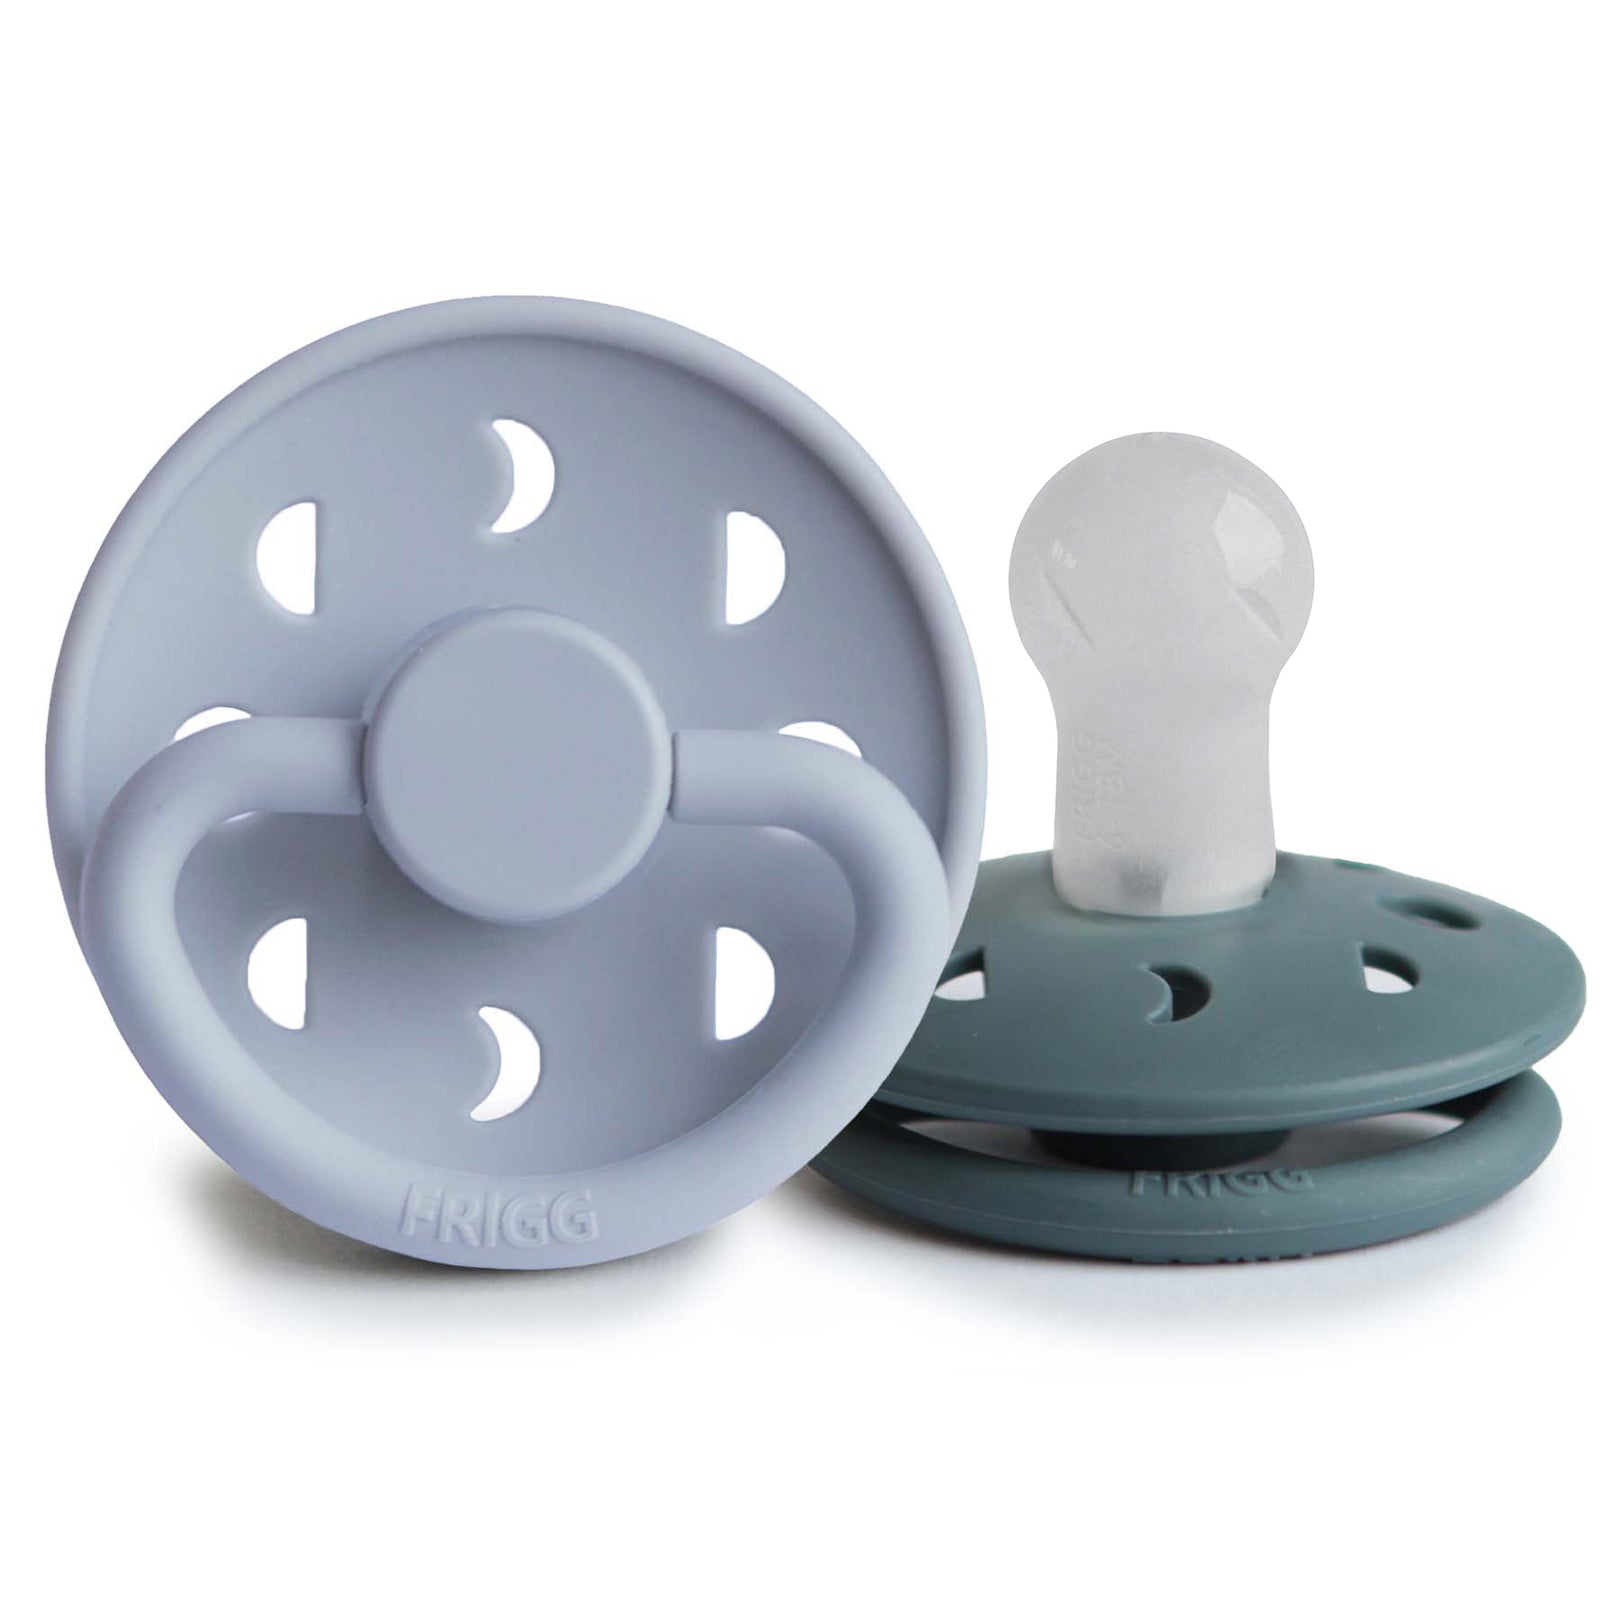 Frigg Moon Silicone Baby Pacifier | 2-Pack - Powder Blue/Slate